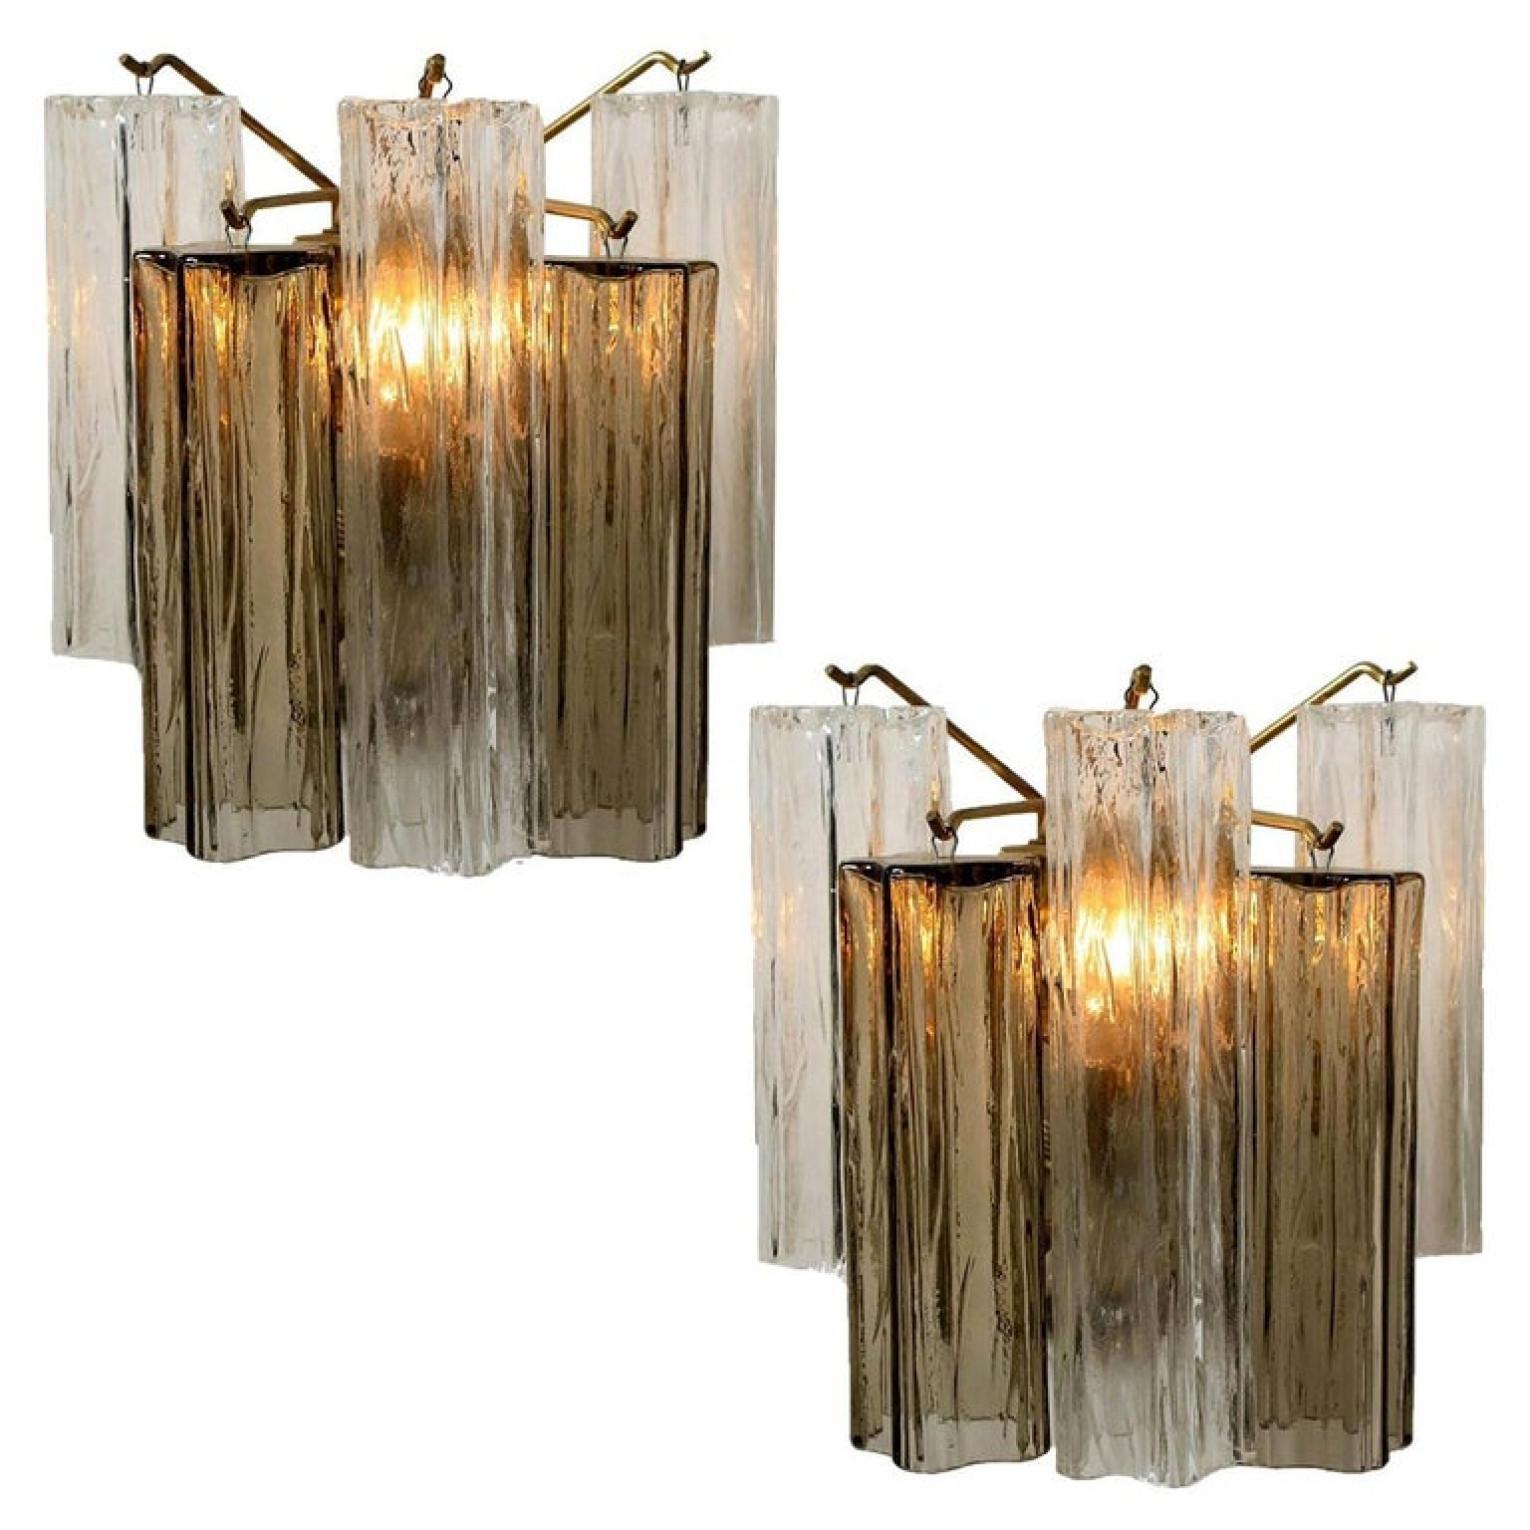 A wonderful pair of Murano glass tronchi wall lights designed by J.T. Kalmar for Kalmar Franken, Vienna, Austria. Manufactured in circa 1960s. These wall lights are handmade and a high quality pieces. Murano tubes in smoked and clear glass hanging